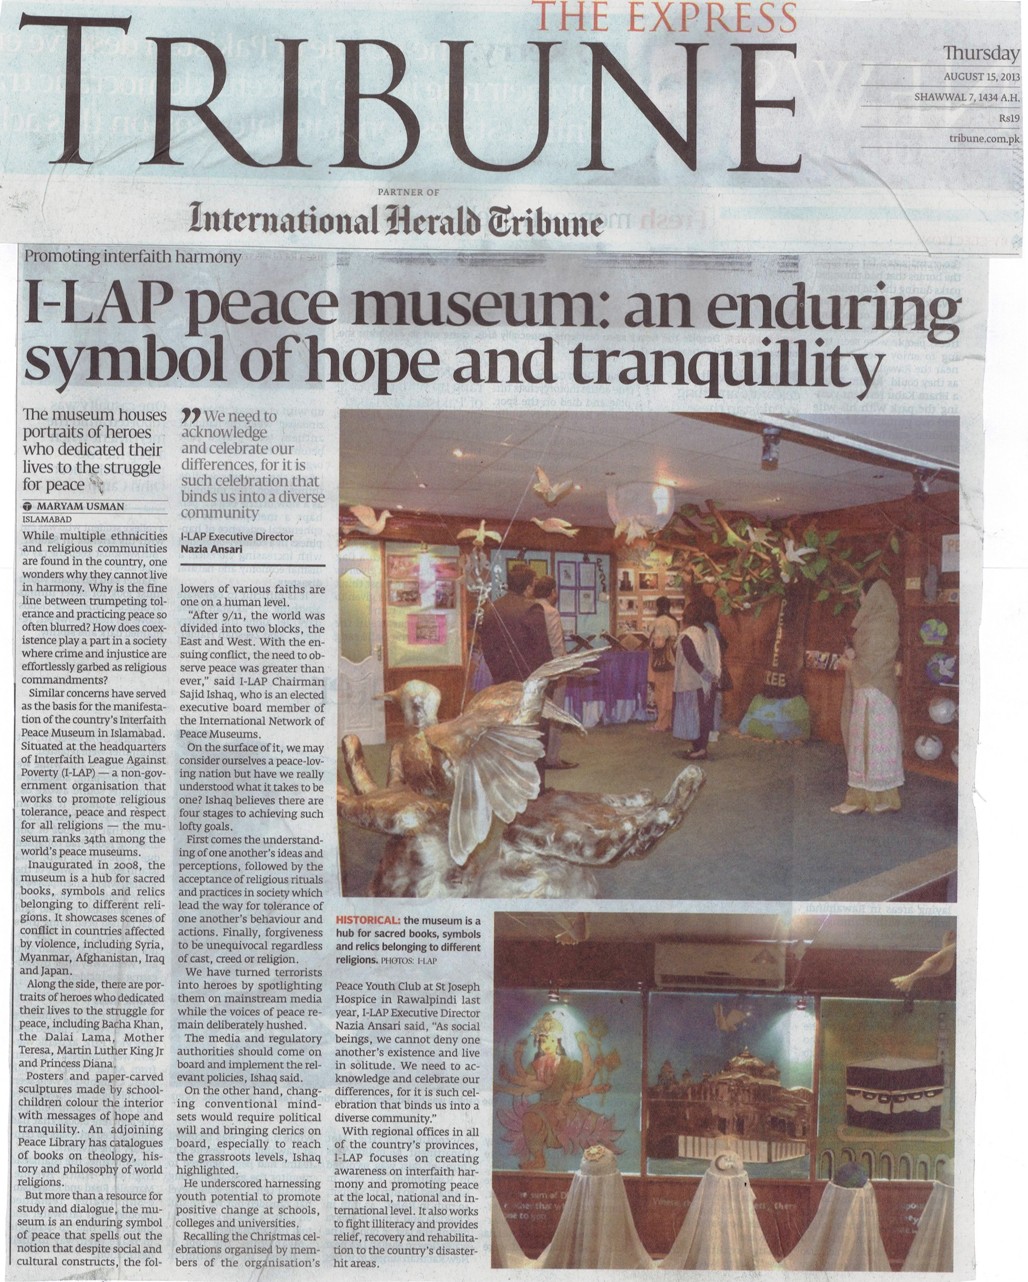 I-LAP peace museum: an enduring symbol of hope and tranquillity